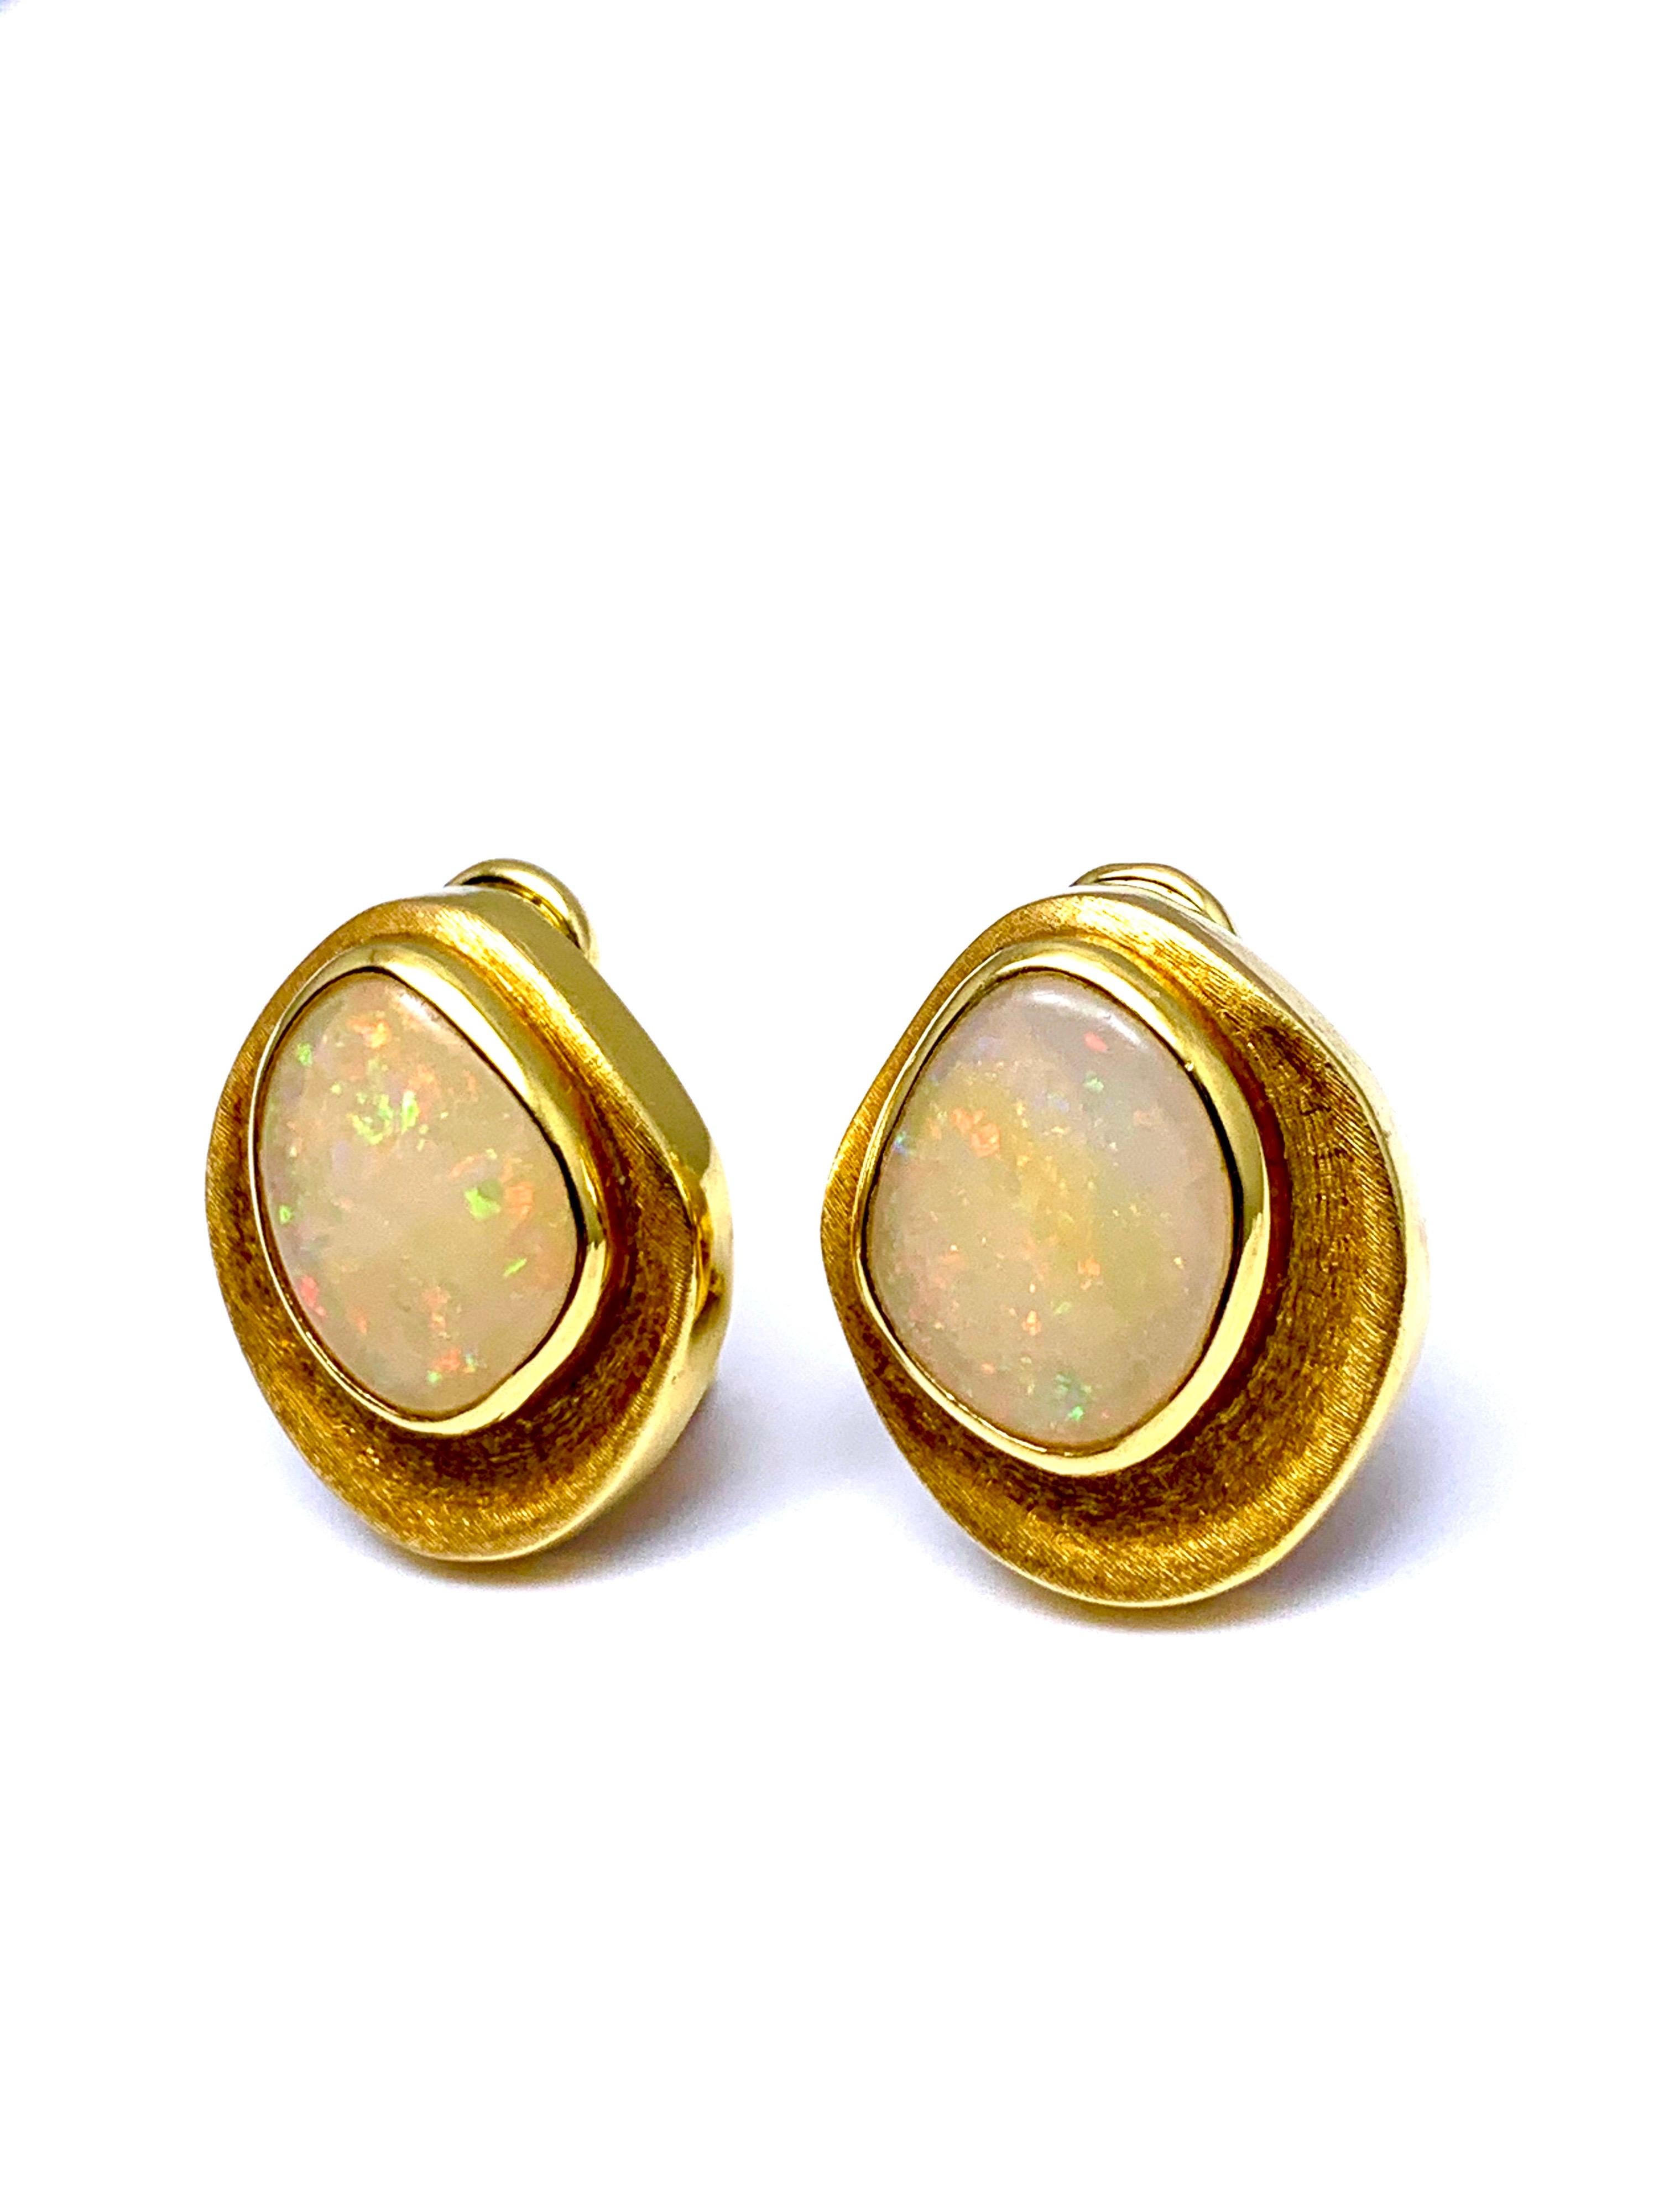 A beautiful White Opal earrings designed by Burle Marx. The 5.97 carat cabochon opals displays a wonderful play of color, bezel set in an 18 karat yellow gold abstarct design earrings. The backs of the earrings are signed 